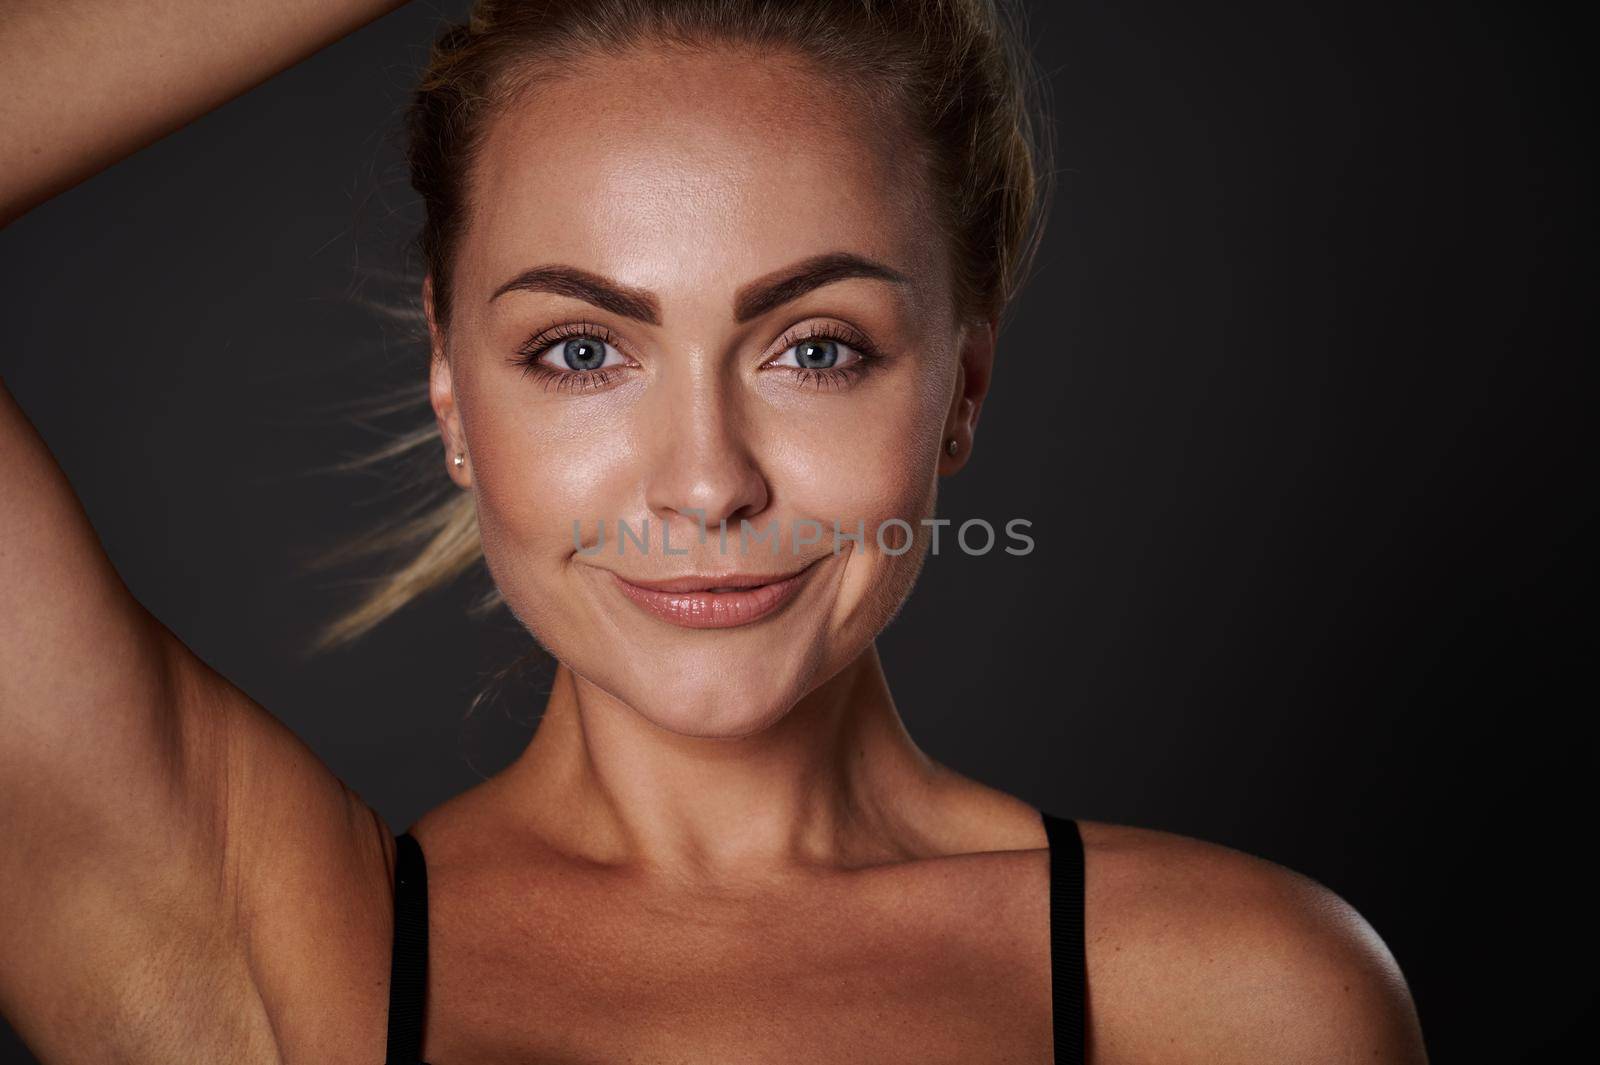 Headshot of a beautiful European woman with fresh clean glowing tanned skin, smiling looking at camera isolated over dark background. Body positivity, self-acceptance, confidence concept by artgf